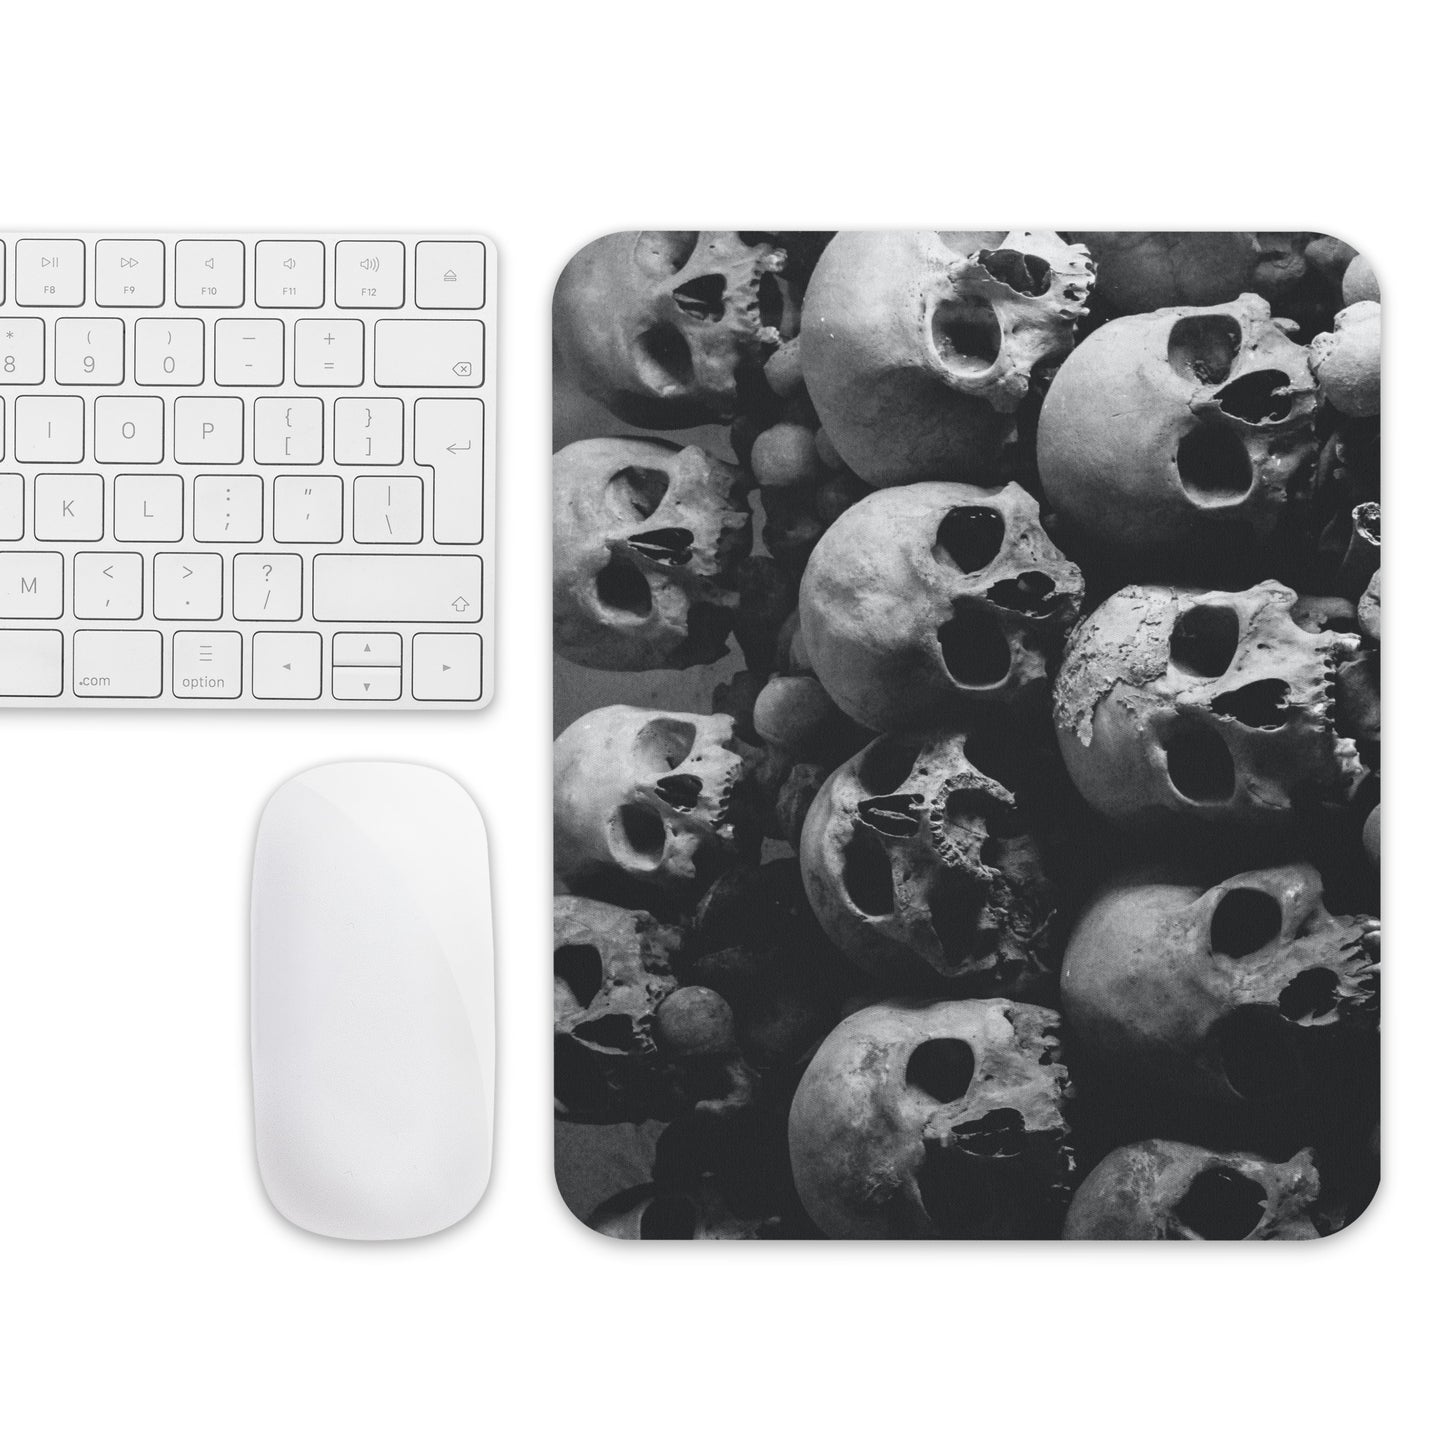 Skull Covered Mouse pad